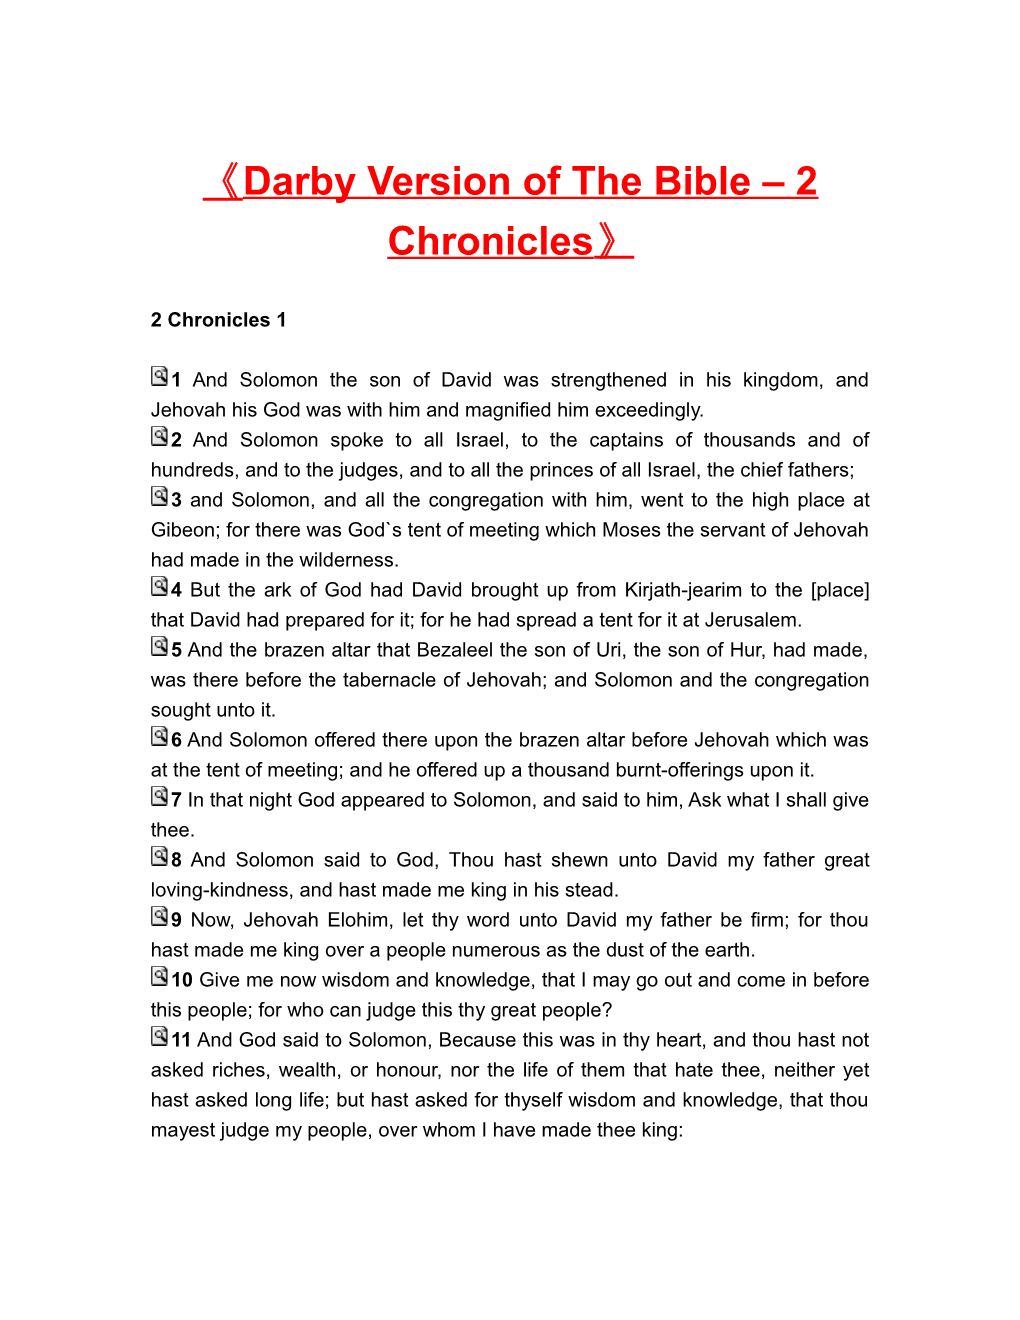 Darby Version of the Bible 2 Chronicles